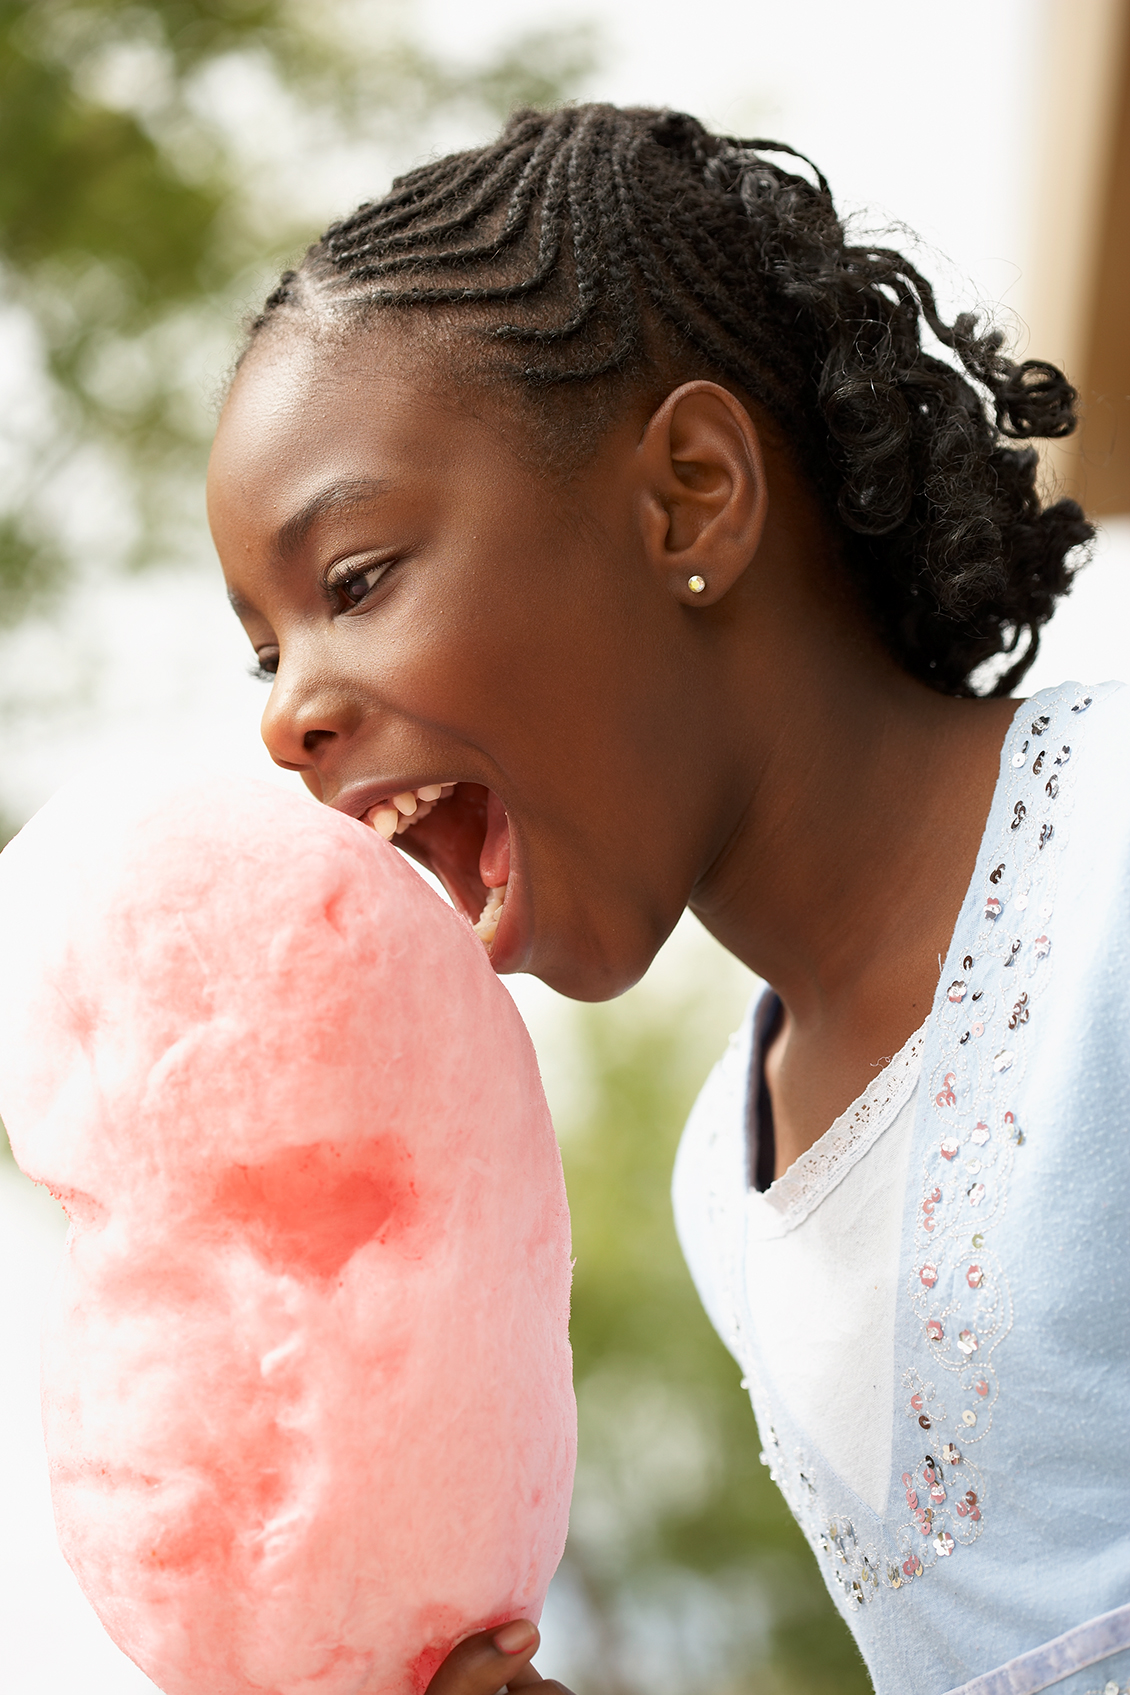 cute girl eating cotton candy photo art director